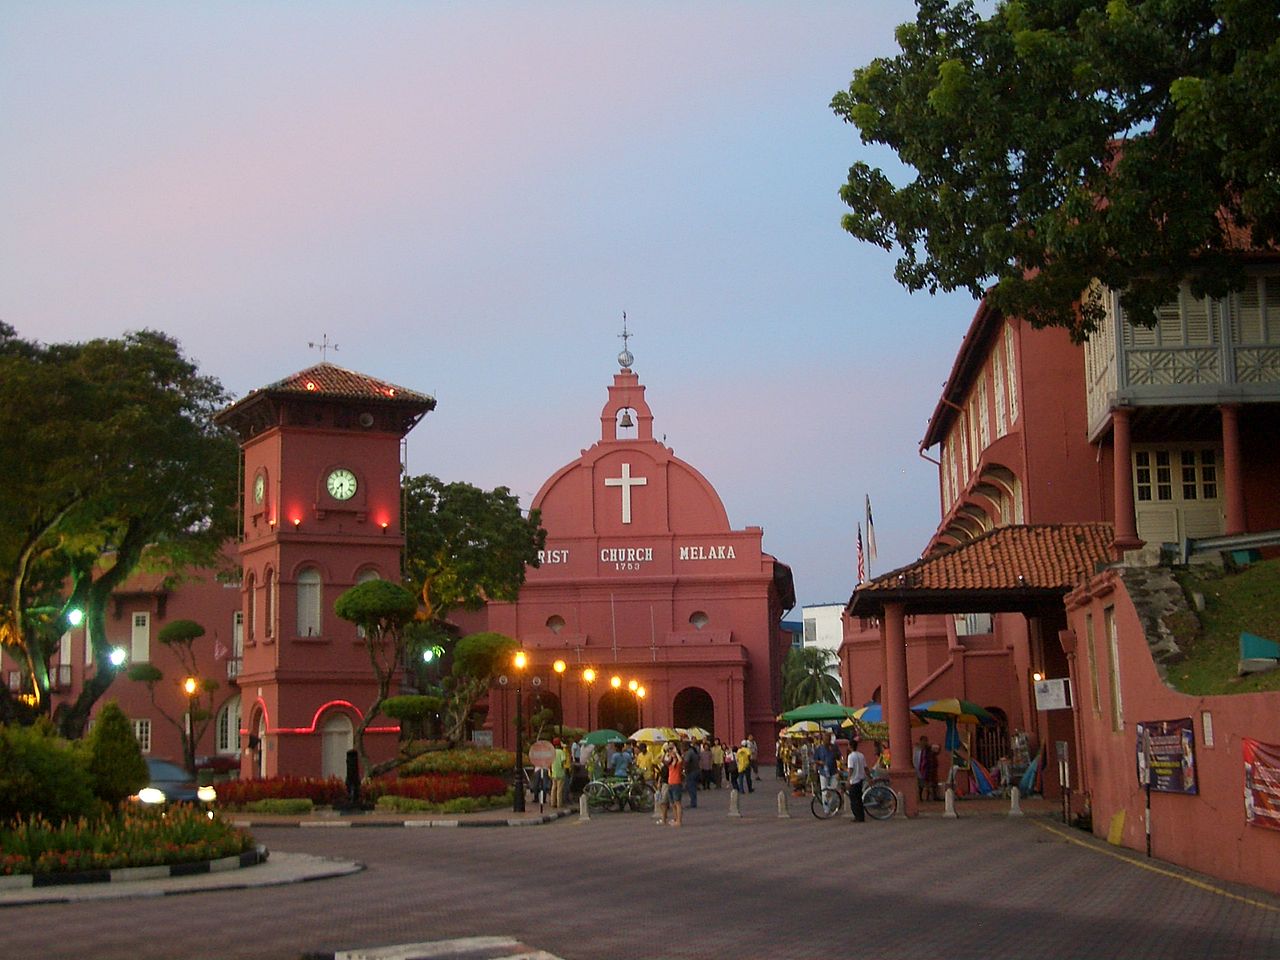 A view of Dutch square in Melaka, with Christ Church in the center.